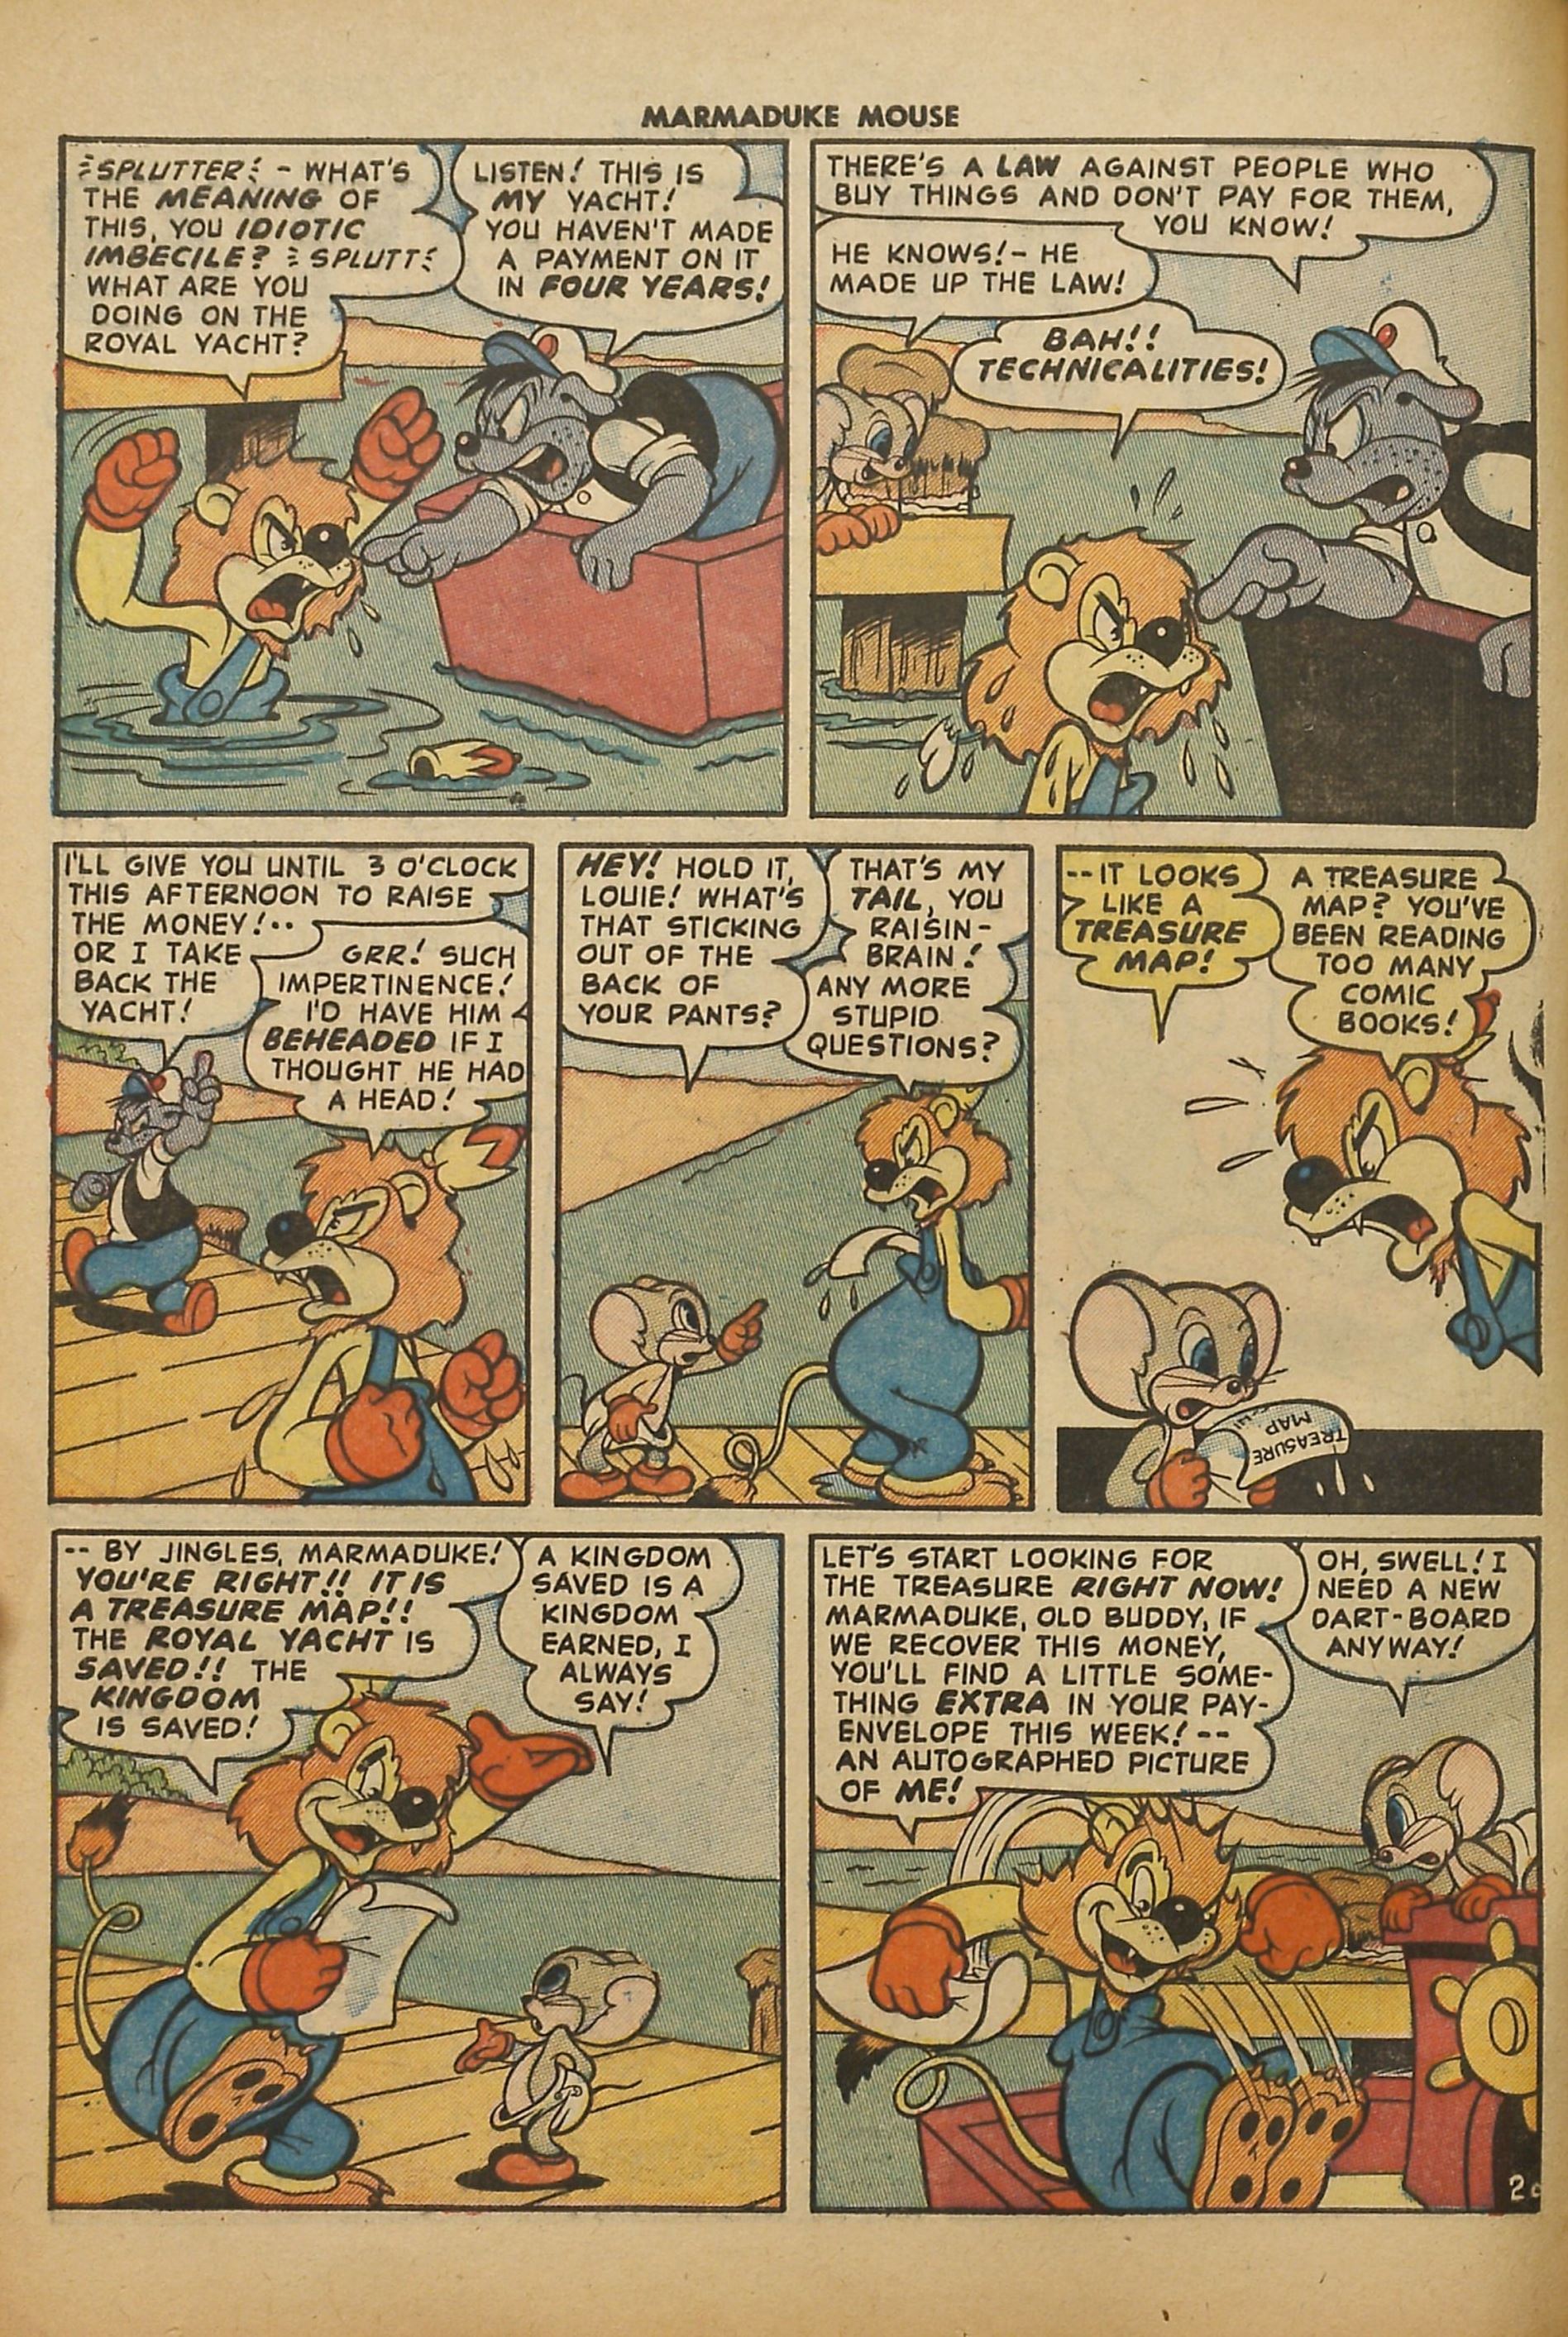 Read online Marmaduke Mouse comic -  Issue #35 - 4